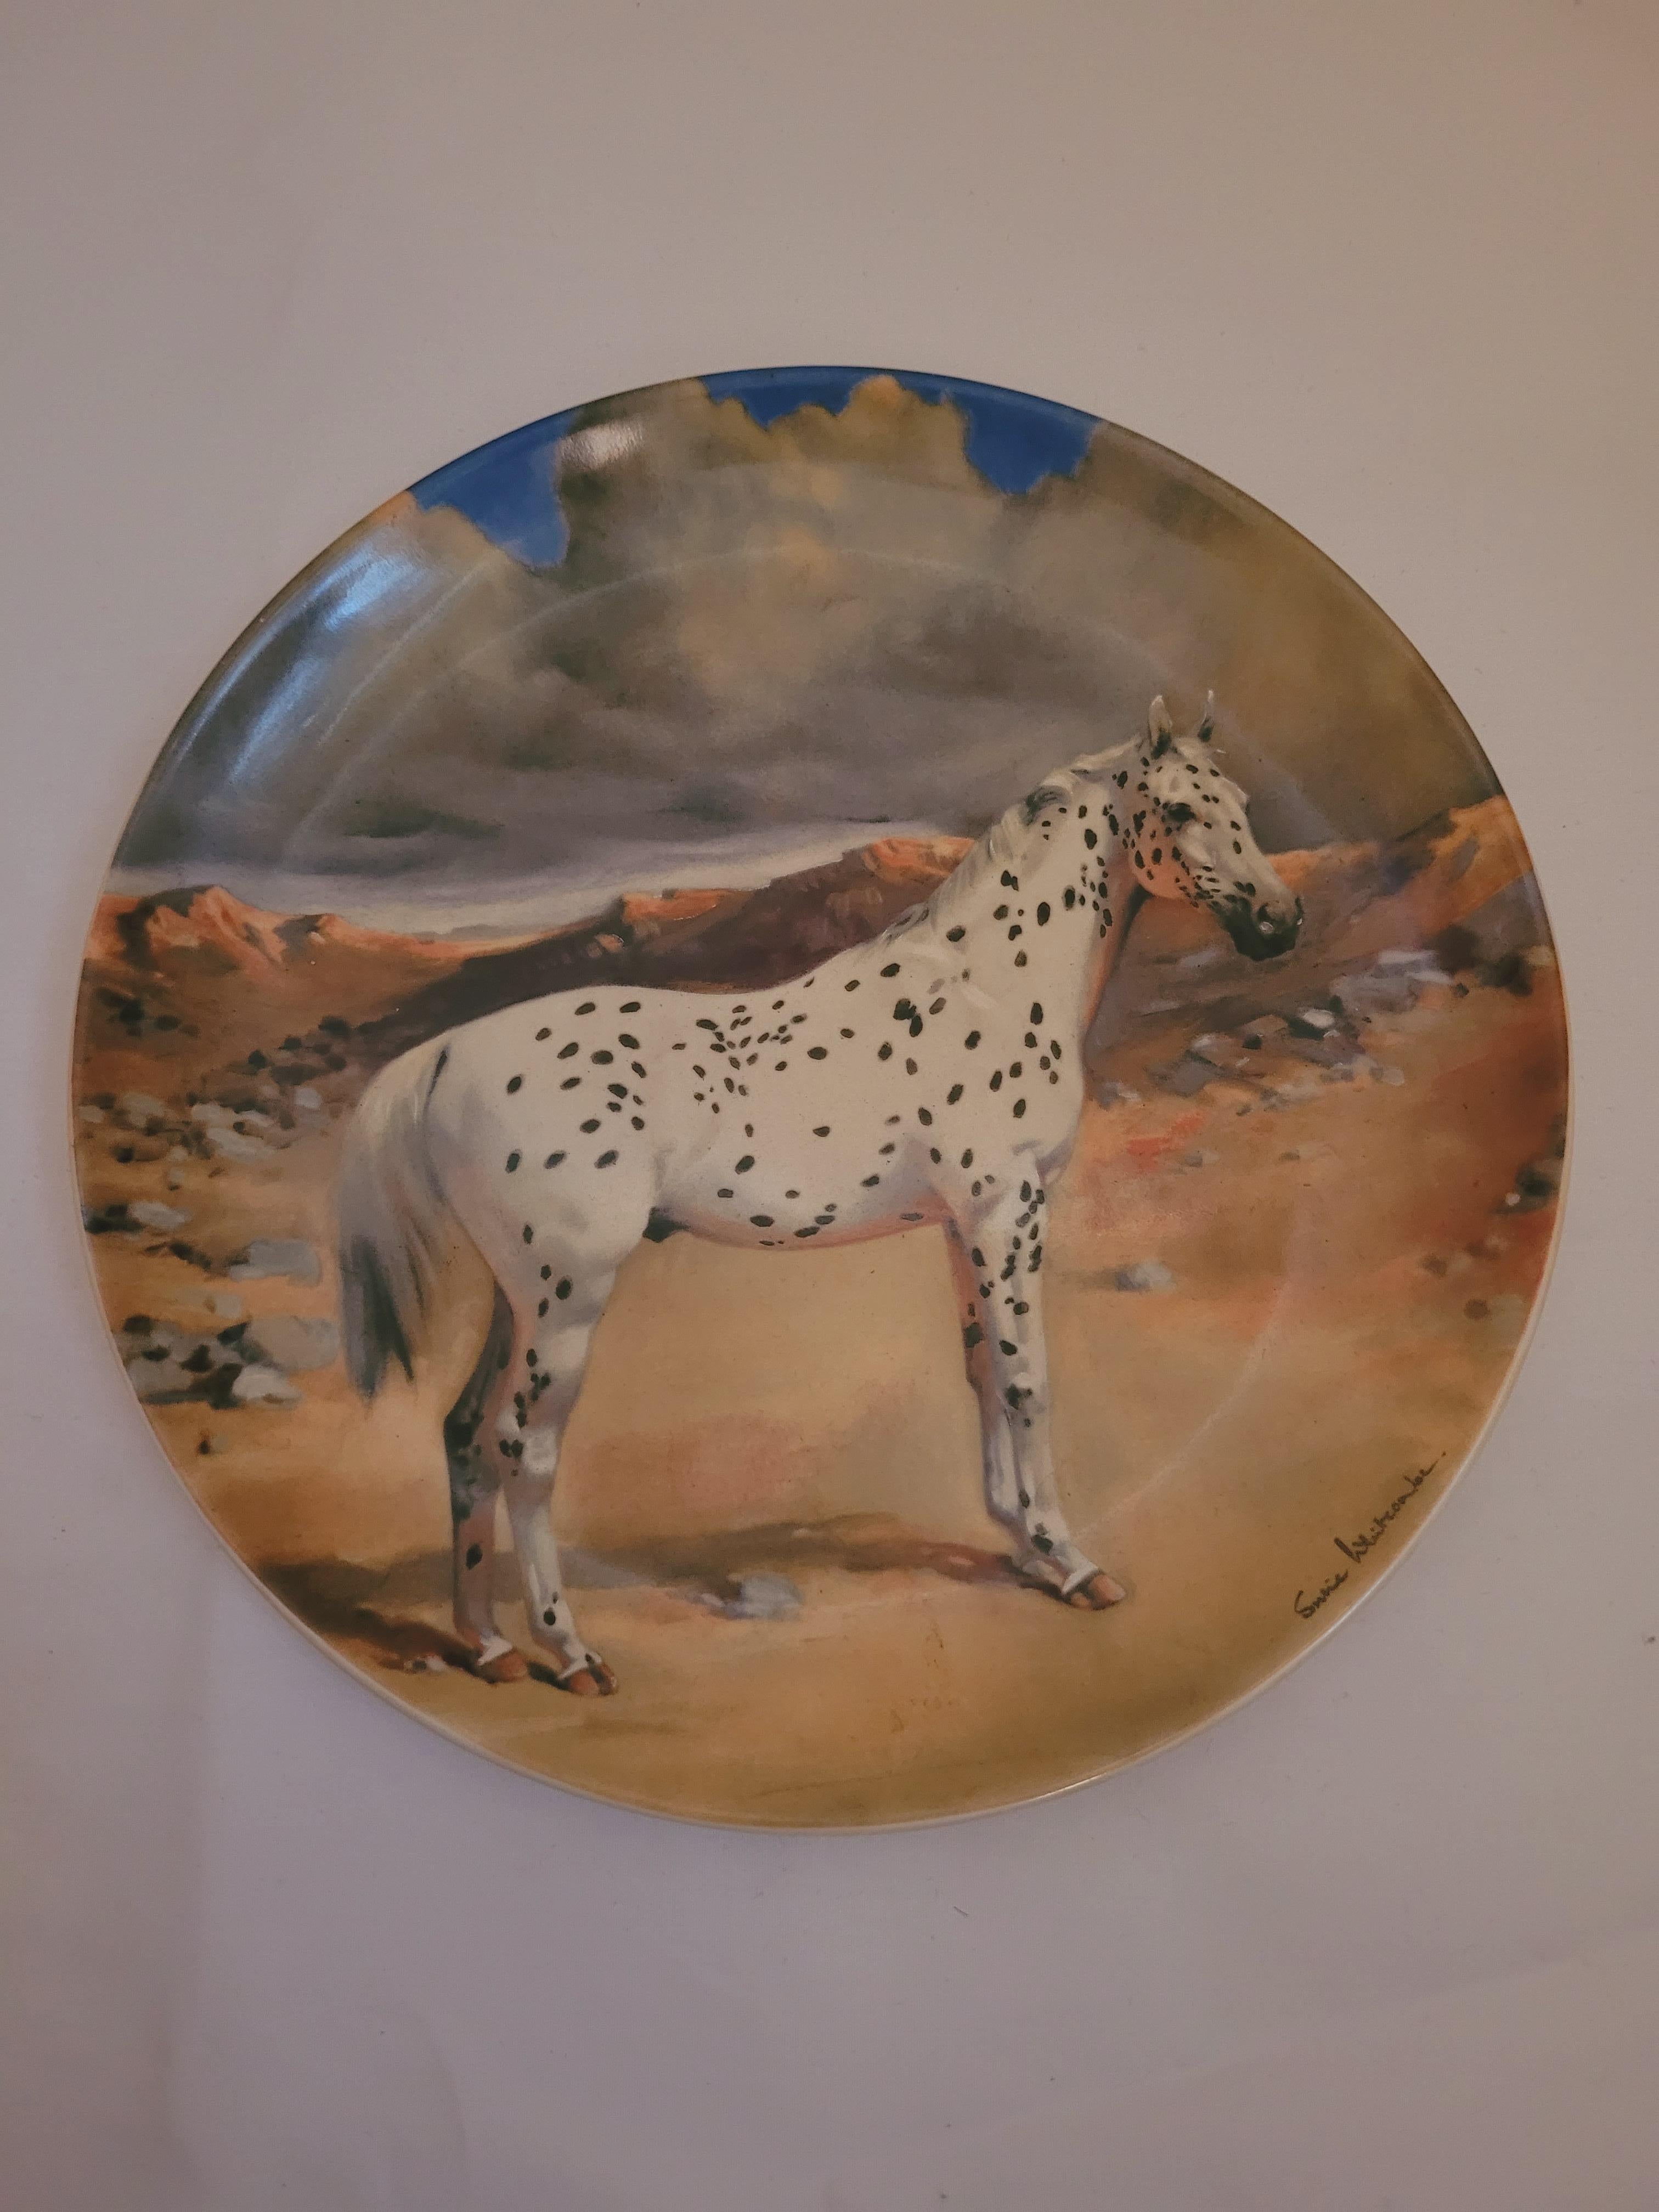 Beautiful vintage signed with certificate of authenticity hand made ceramic decorative plates by Will Nelson and Susie Whitcombe brilliant condition.